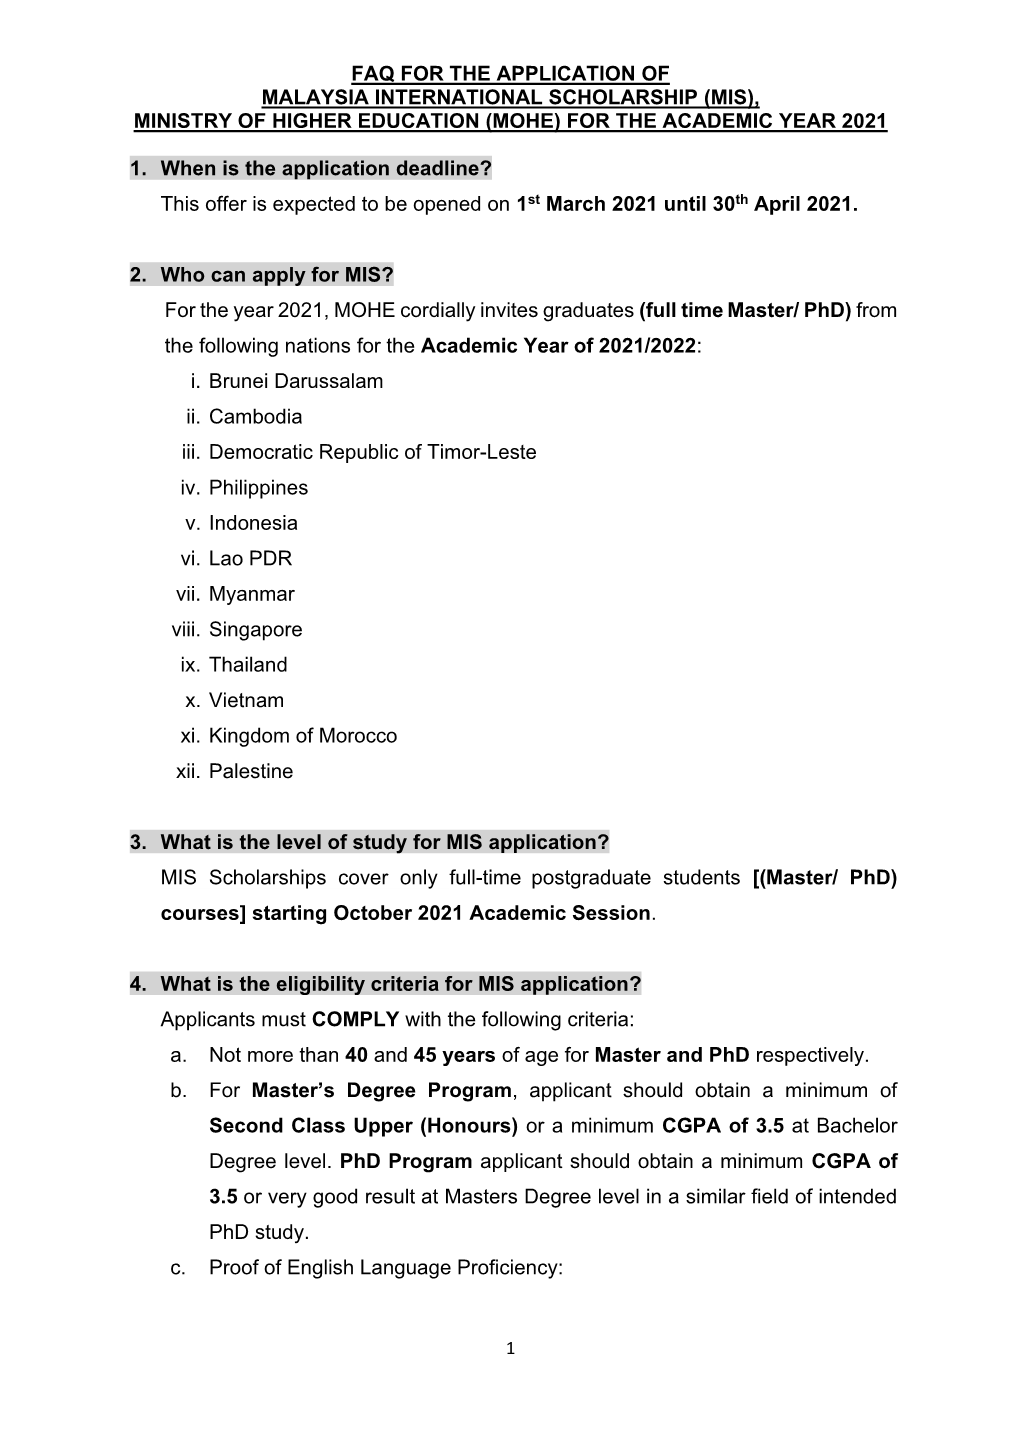 Faq for the Application of Malaysia International Scholarship (Mis), Ministry of Higher Education (Mohe) for the Academic Year 2021